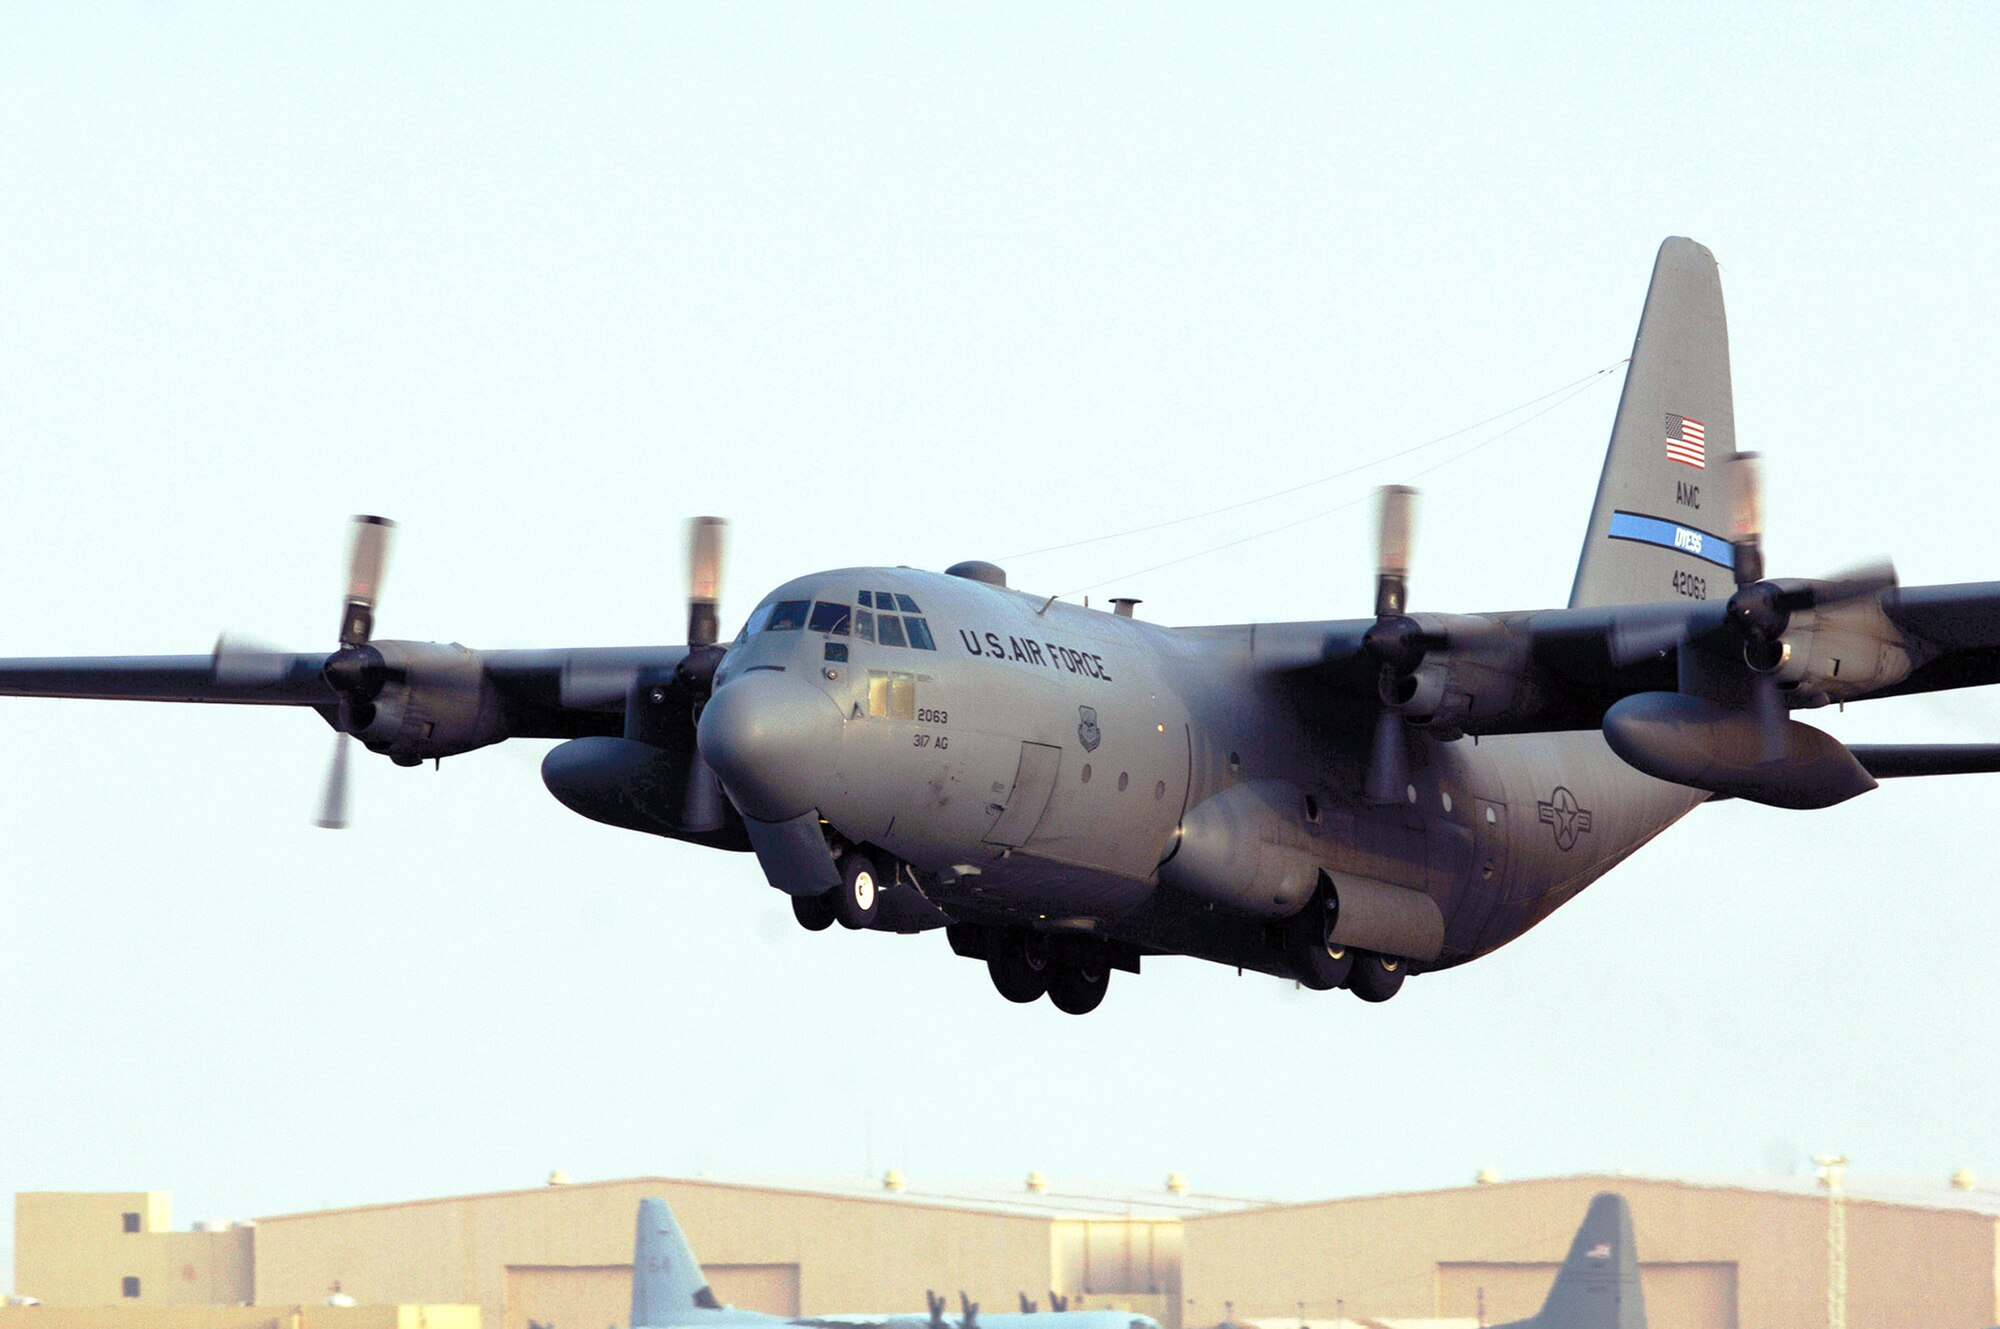 An Air Force C-130 Hercules takes off for an airlift mission from a base in Southwest Asia. More than 150 airlift sorties were flown by coalition aircraft July 1 throughout the area of responsibility. (U.S. Air Force photo)